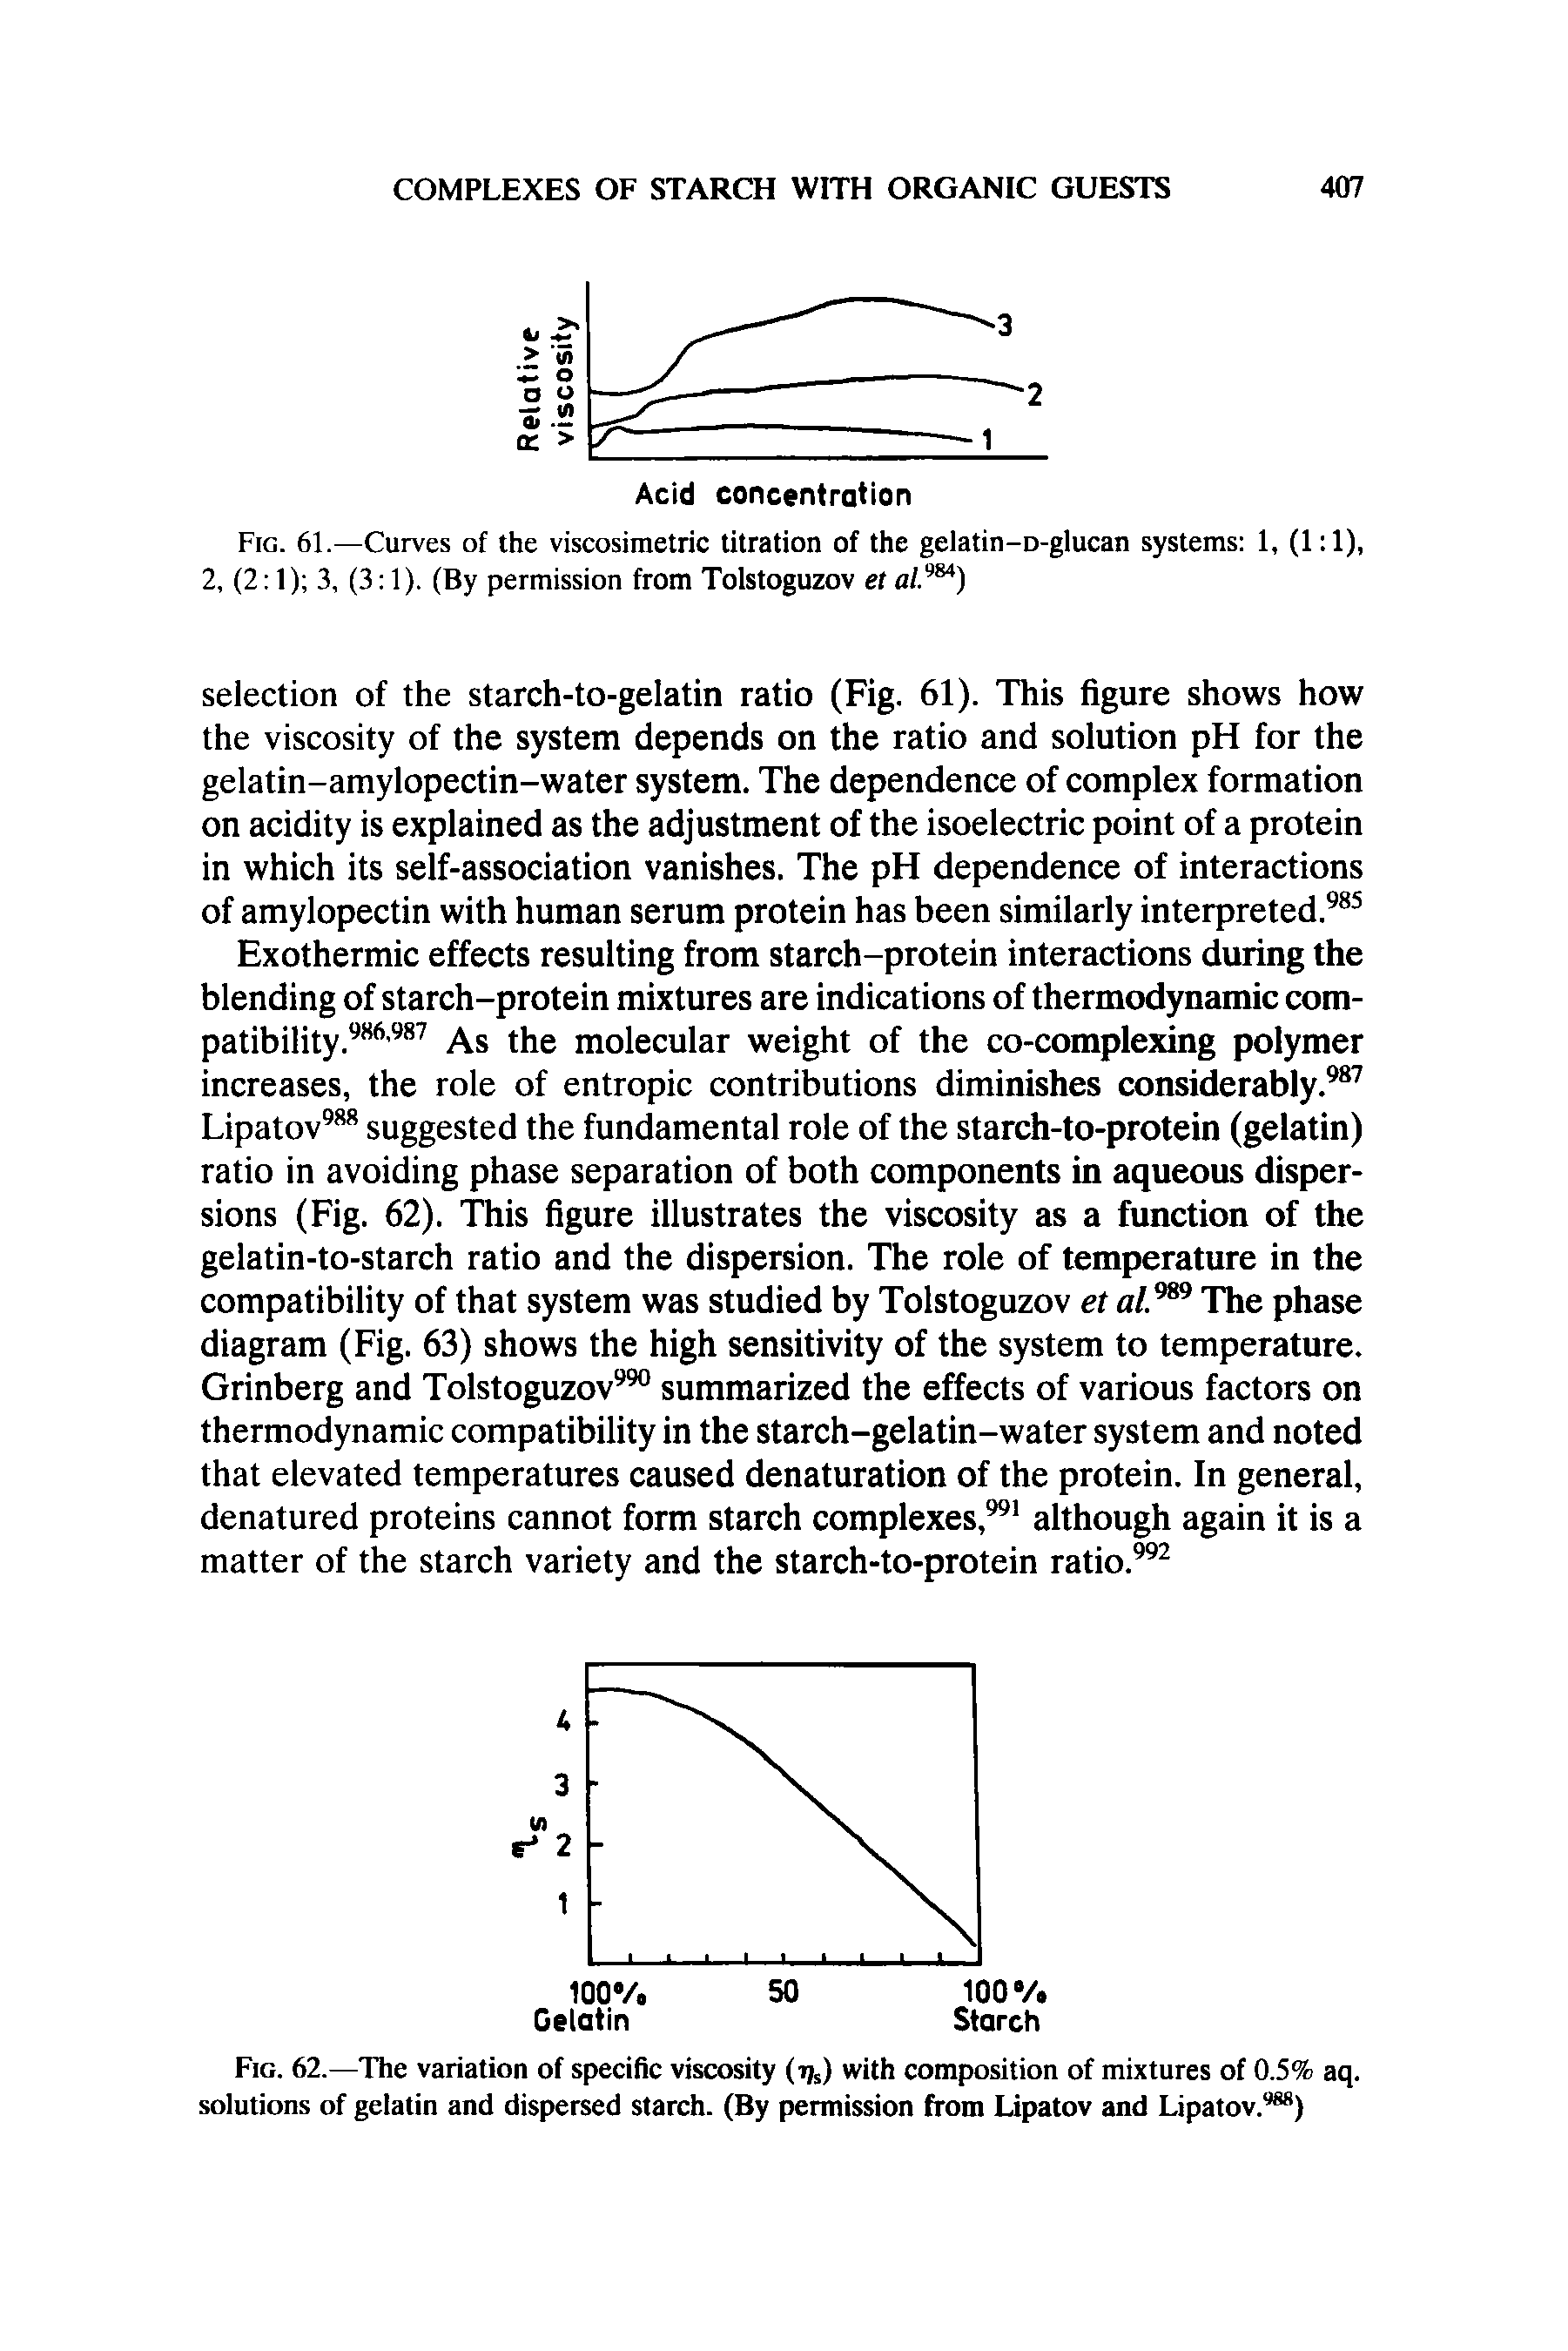 Fig. 62.—The variation of specific viscosity (tjs) with composition of mixtures of 0.5% aq. solutions of gelatin and dispersed starch. (By permission from Lipatov and Lipatov.988)...